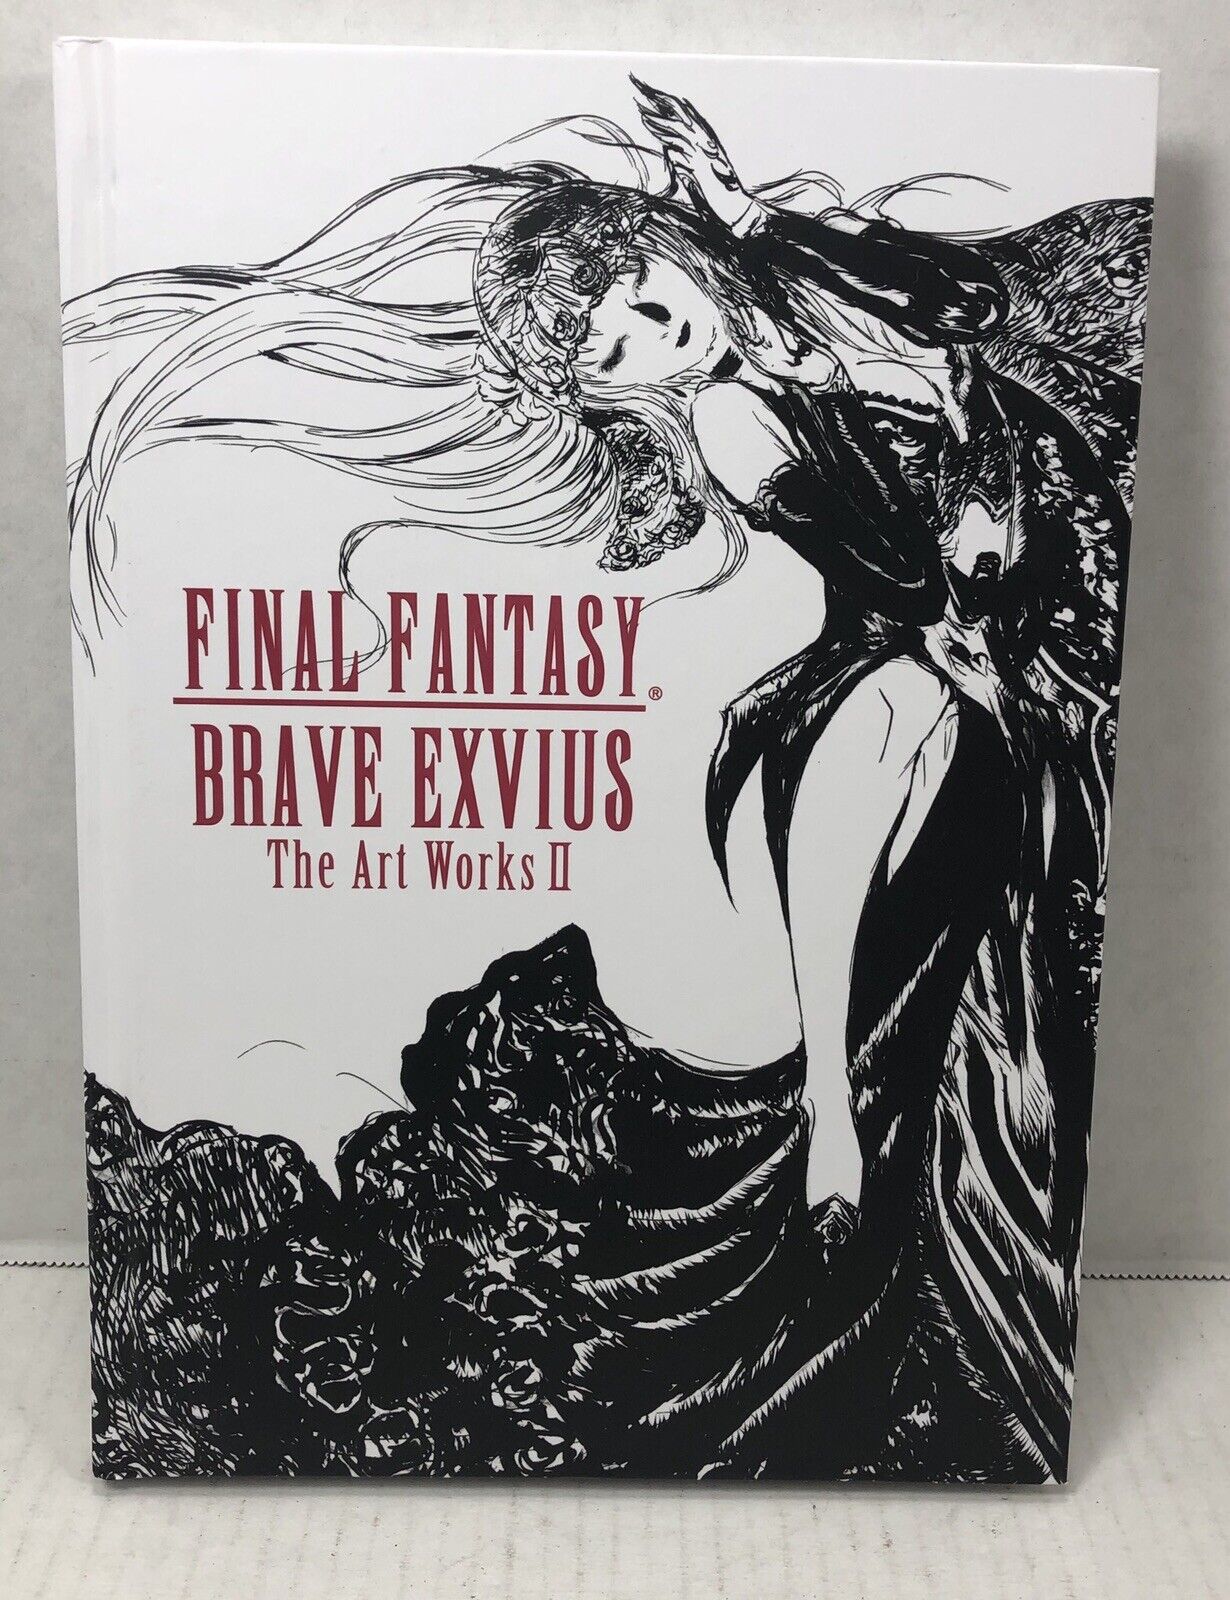 SQUARE ENIX FINAL FANTASY BRAVE EXVIUS The Art Works II Official Limited